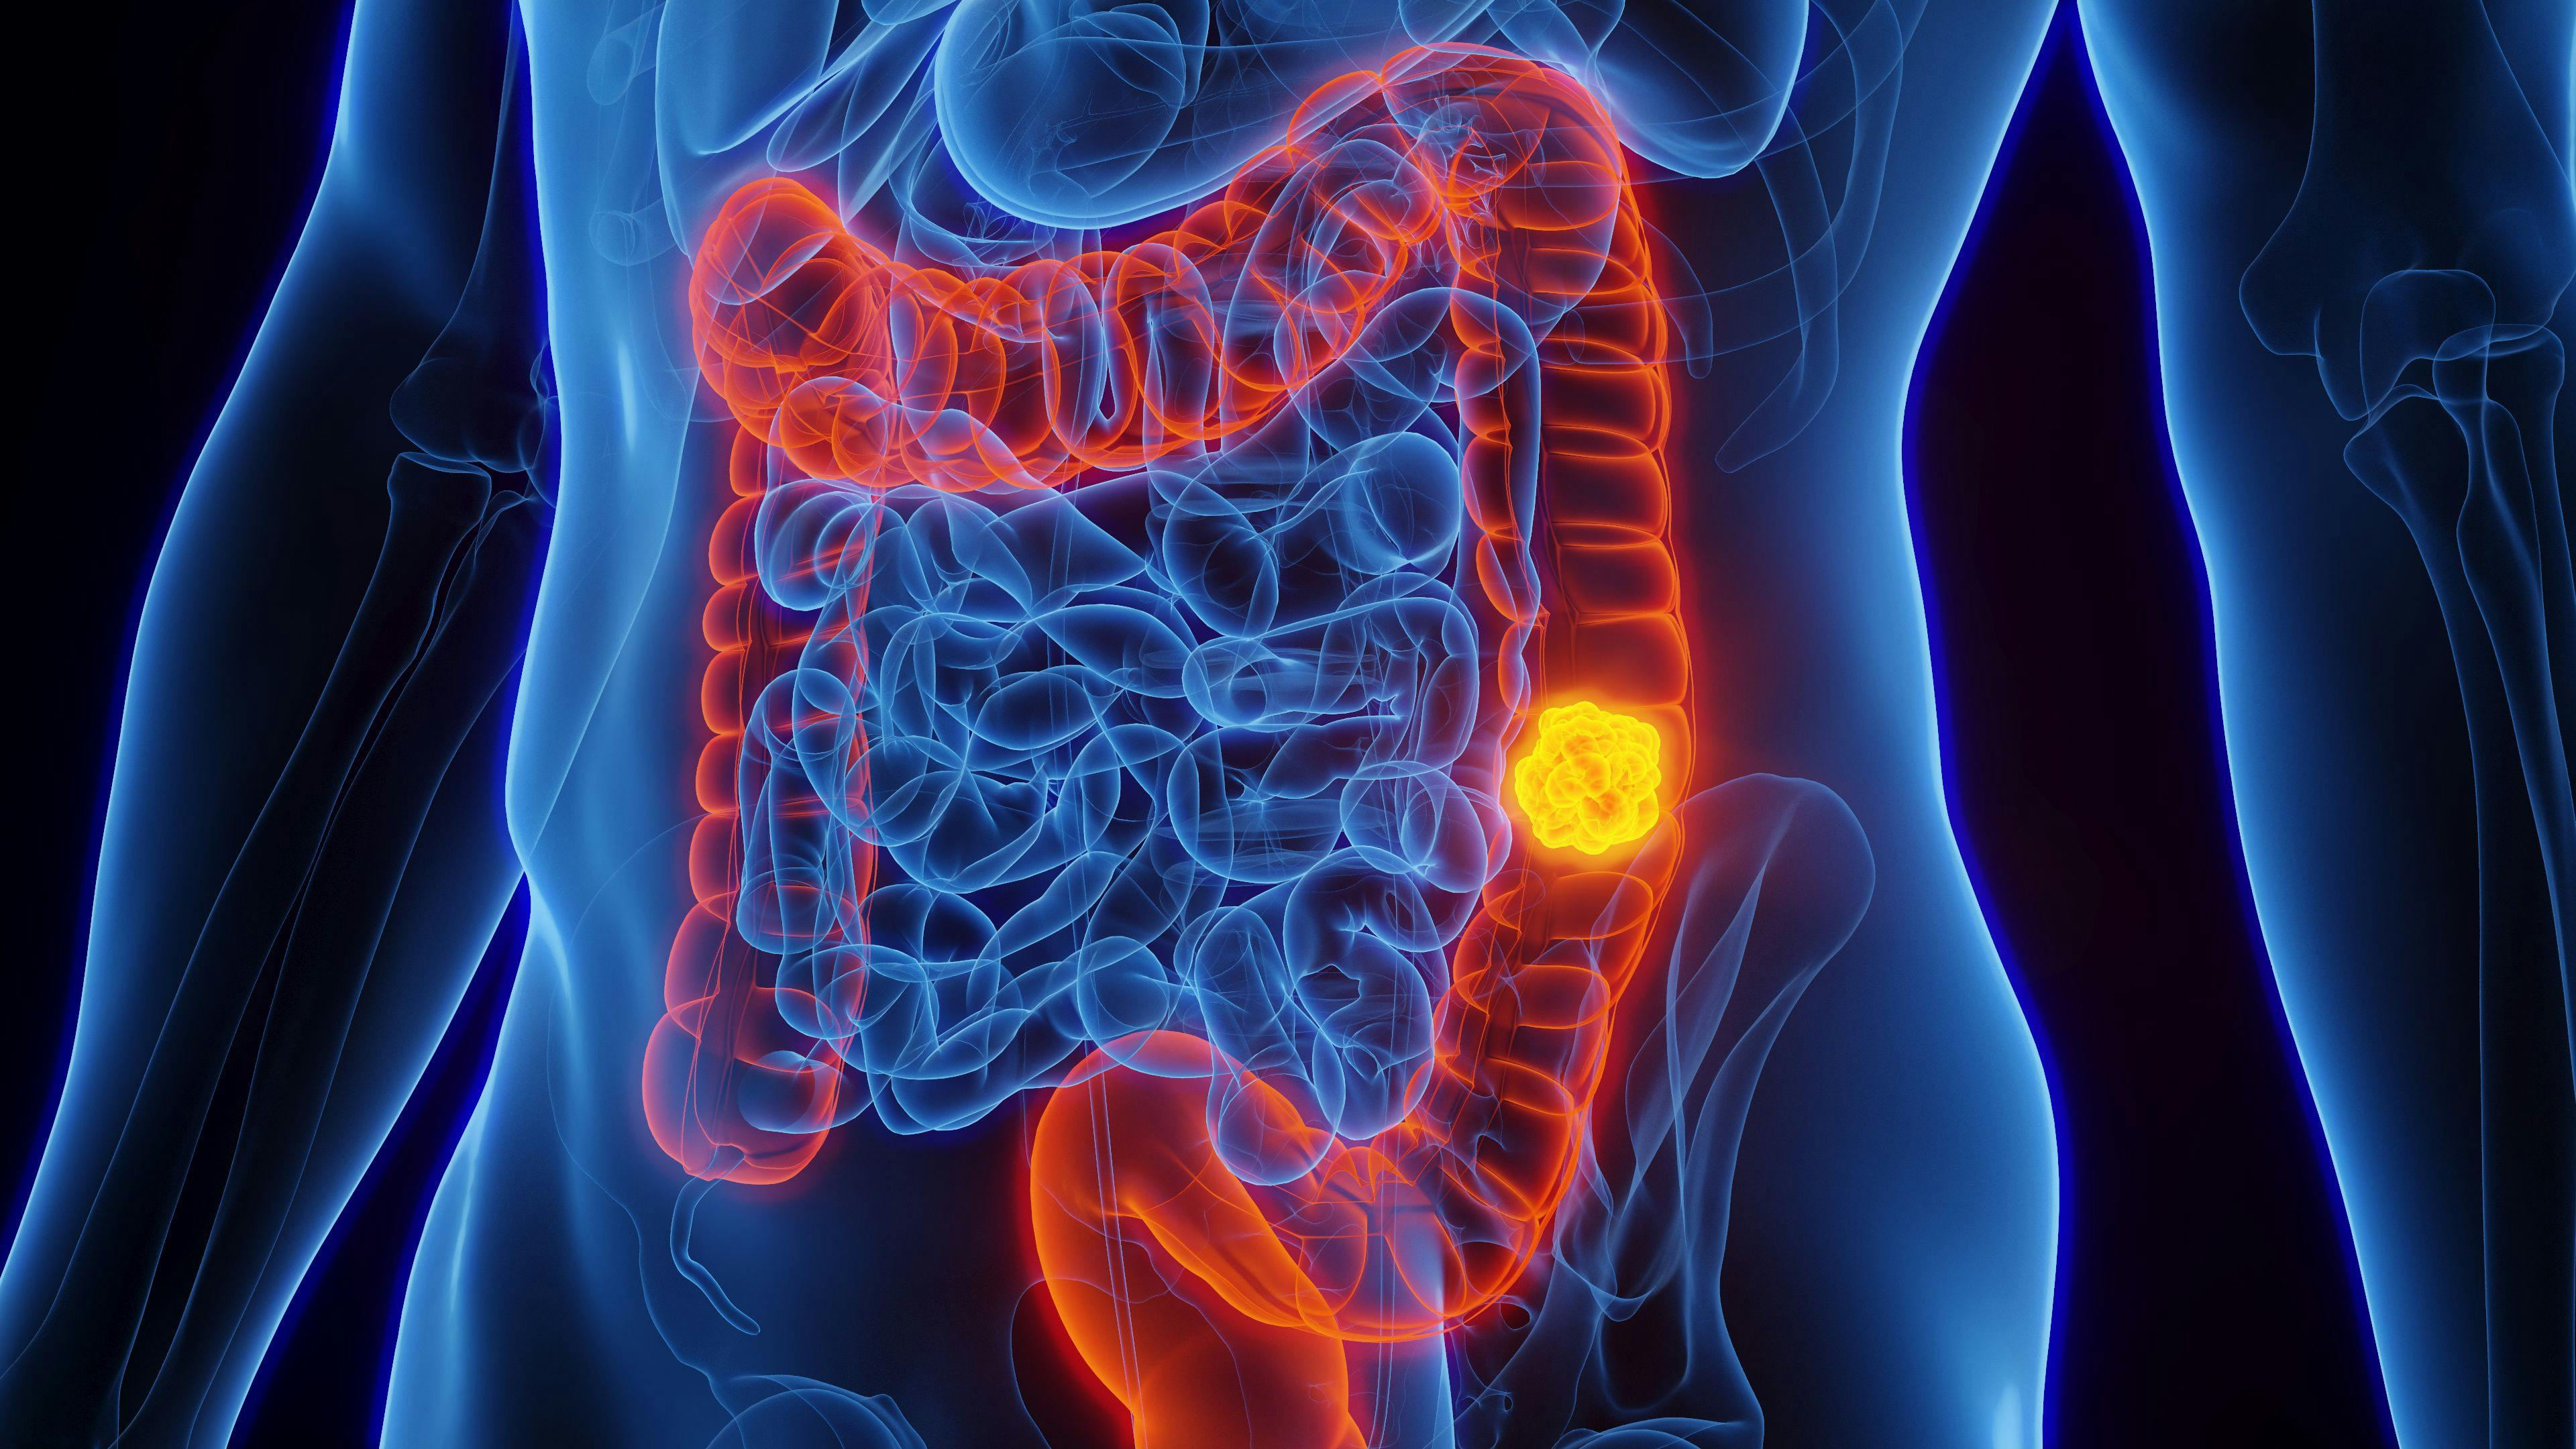 Higher Rate of Metastasis to Main Nodes in Transverse Colon Cancer